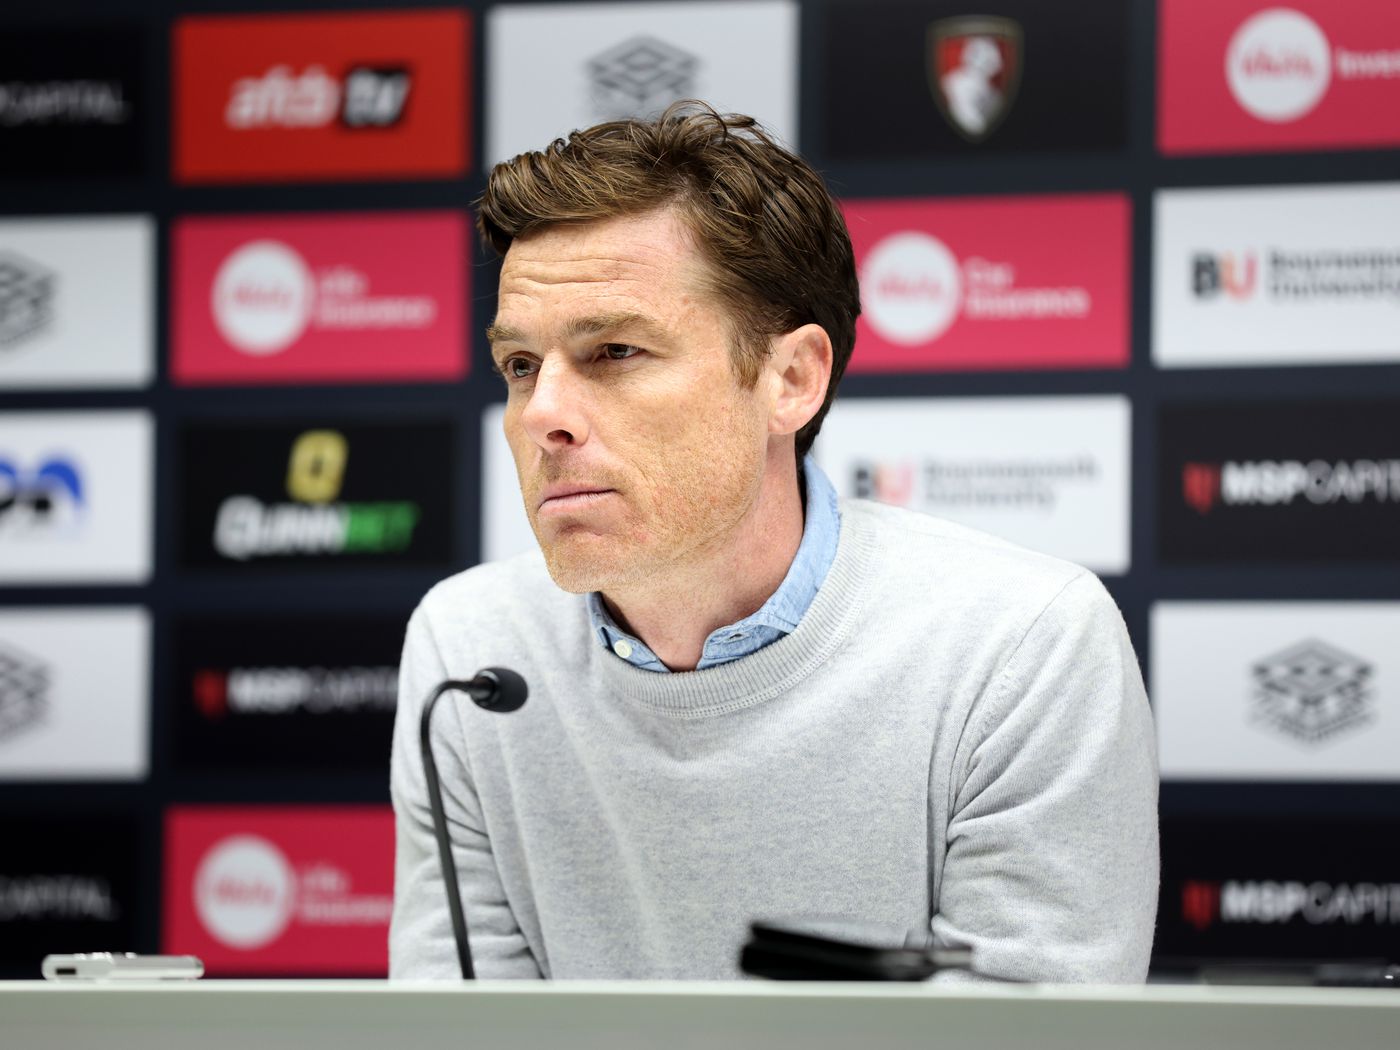 AFC Bournemouth vs Reading: Match Preview 2021/22 - The Tilehurst End